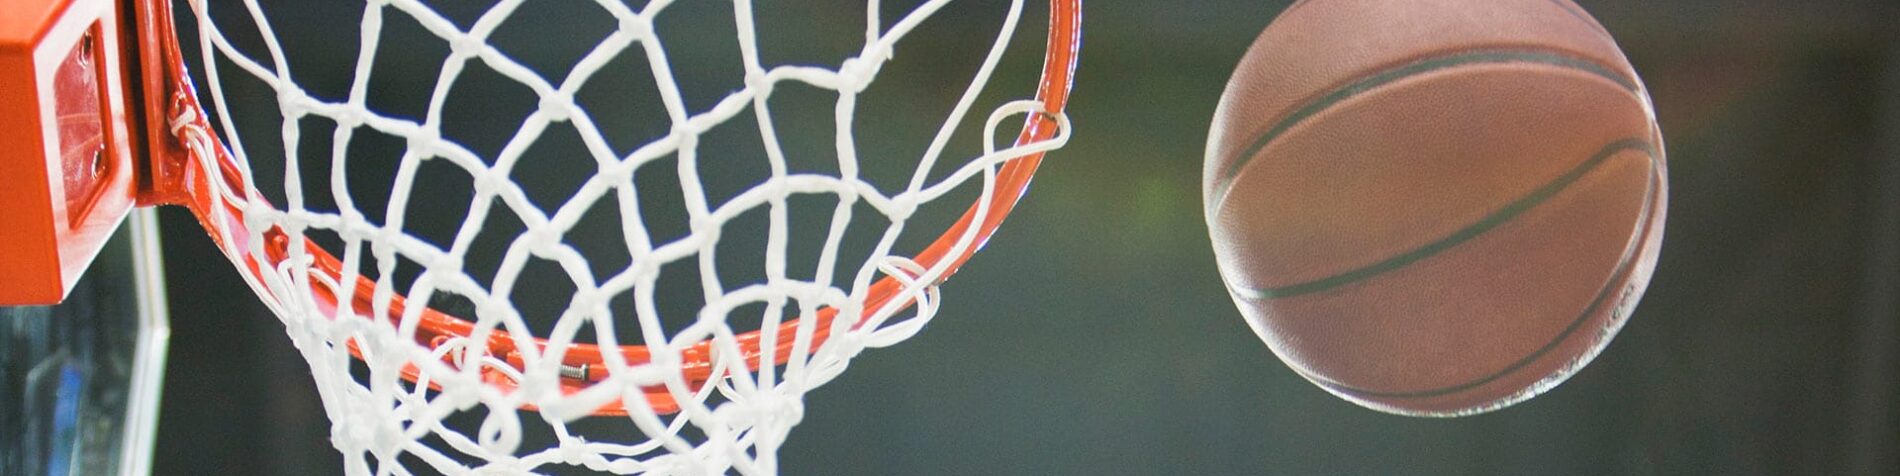 NBA Selects RISE with SAP to Continue Cloud Evolution